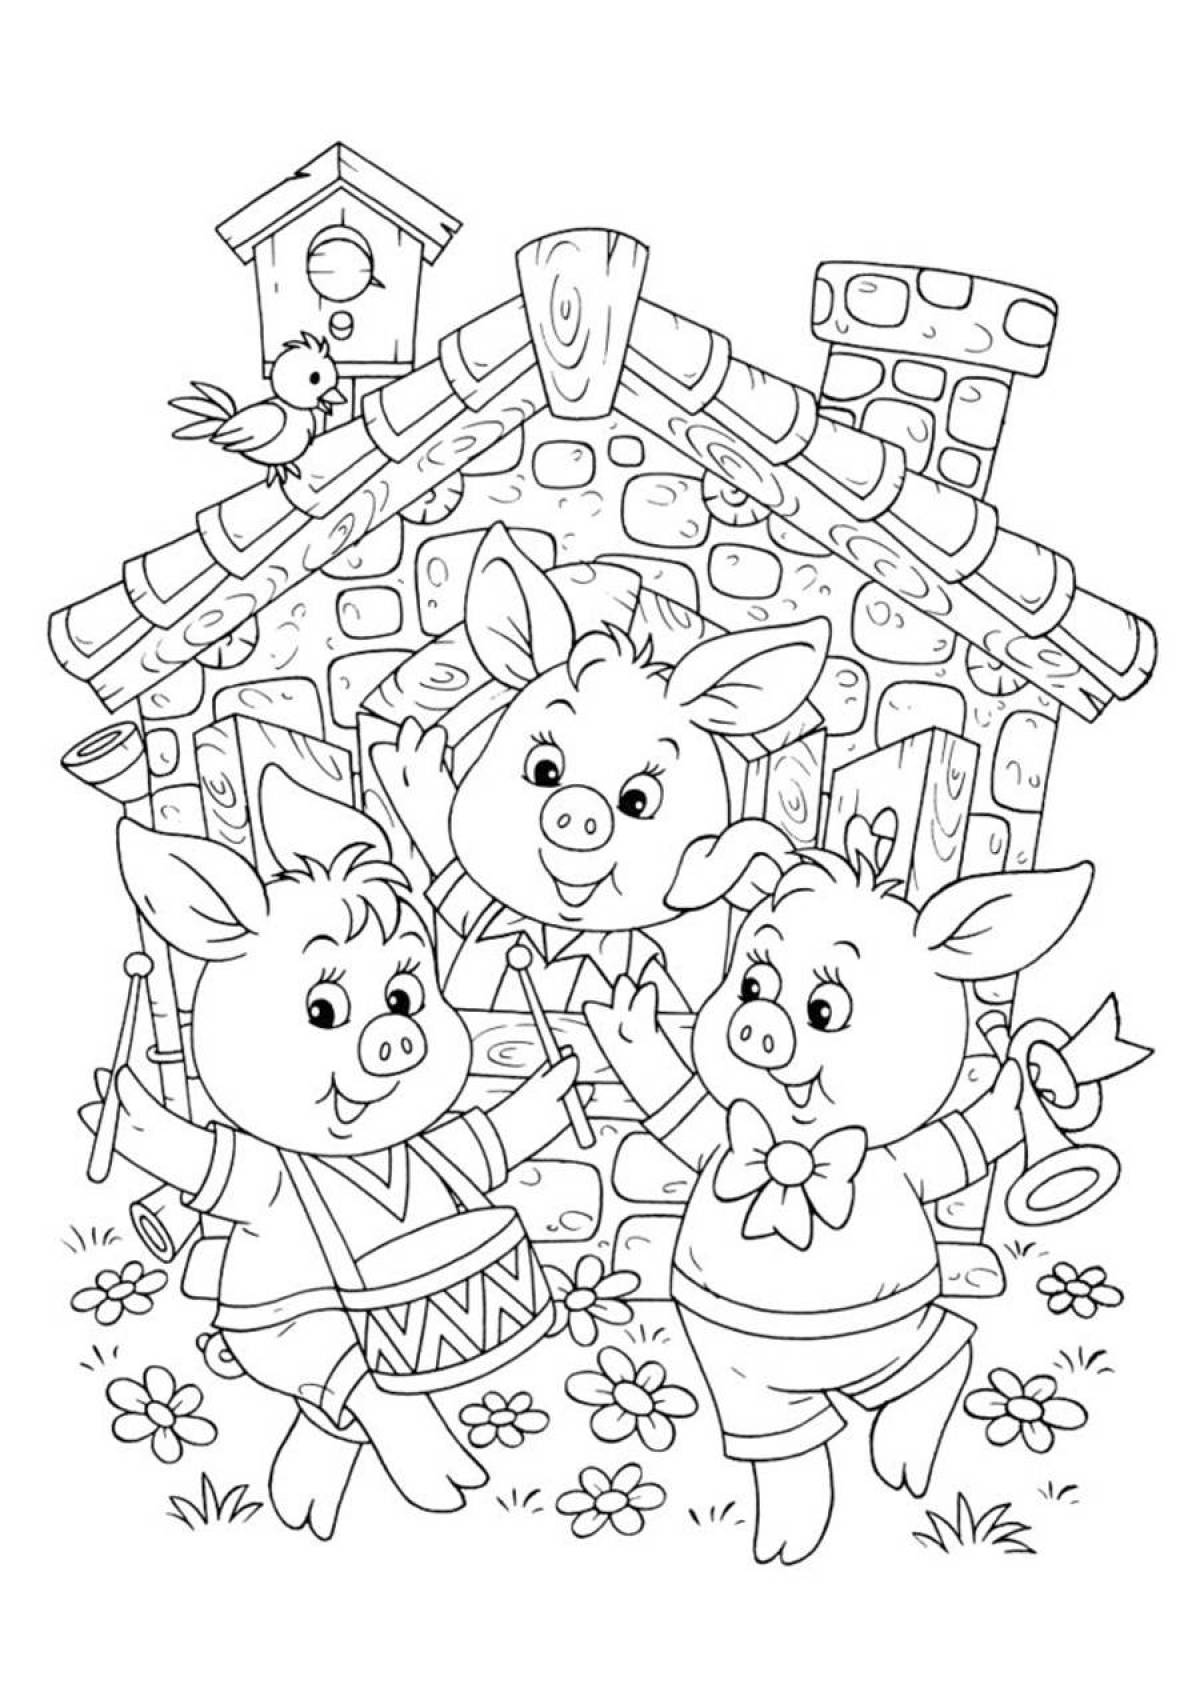 Three little pigs coloring page